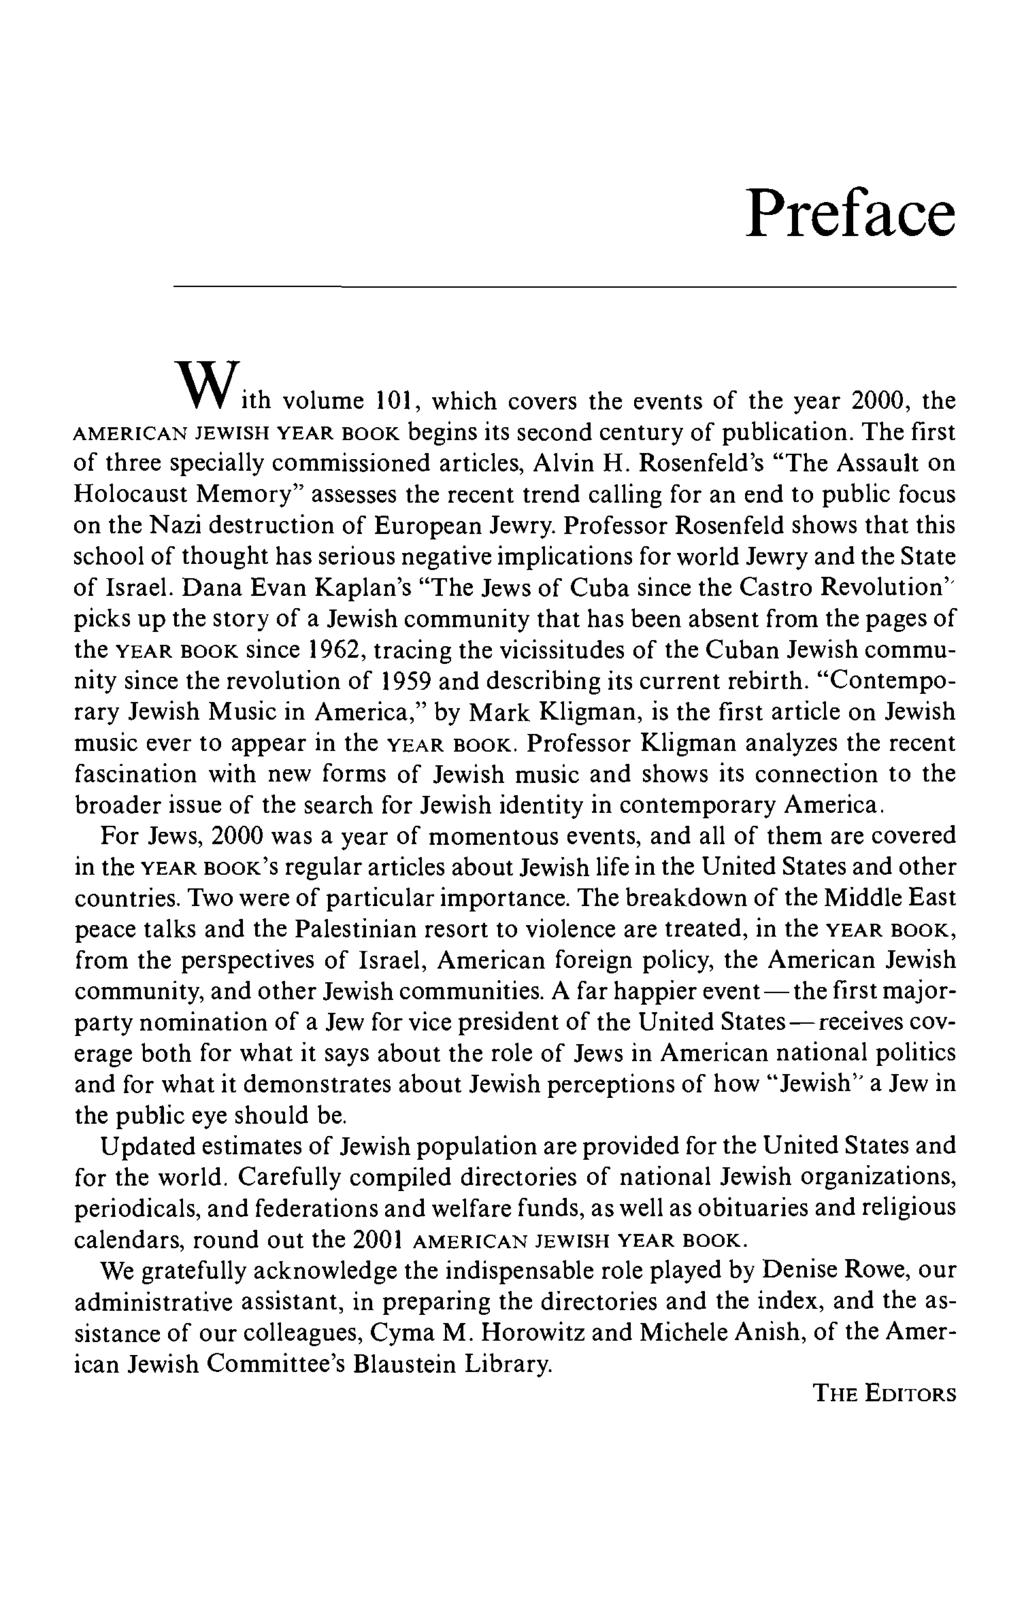 Preface W,ith volume 101, which covers the events of the year 2000, the AMERICAN JEWISH YEAR BOOK begins its second century of publication. The first of three specially commissioned articles, Alvin H.